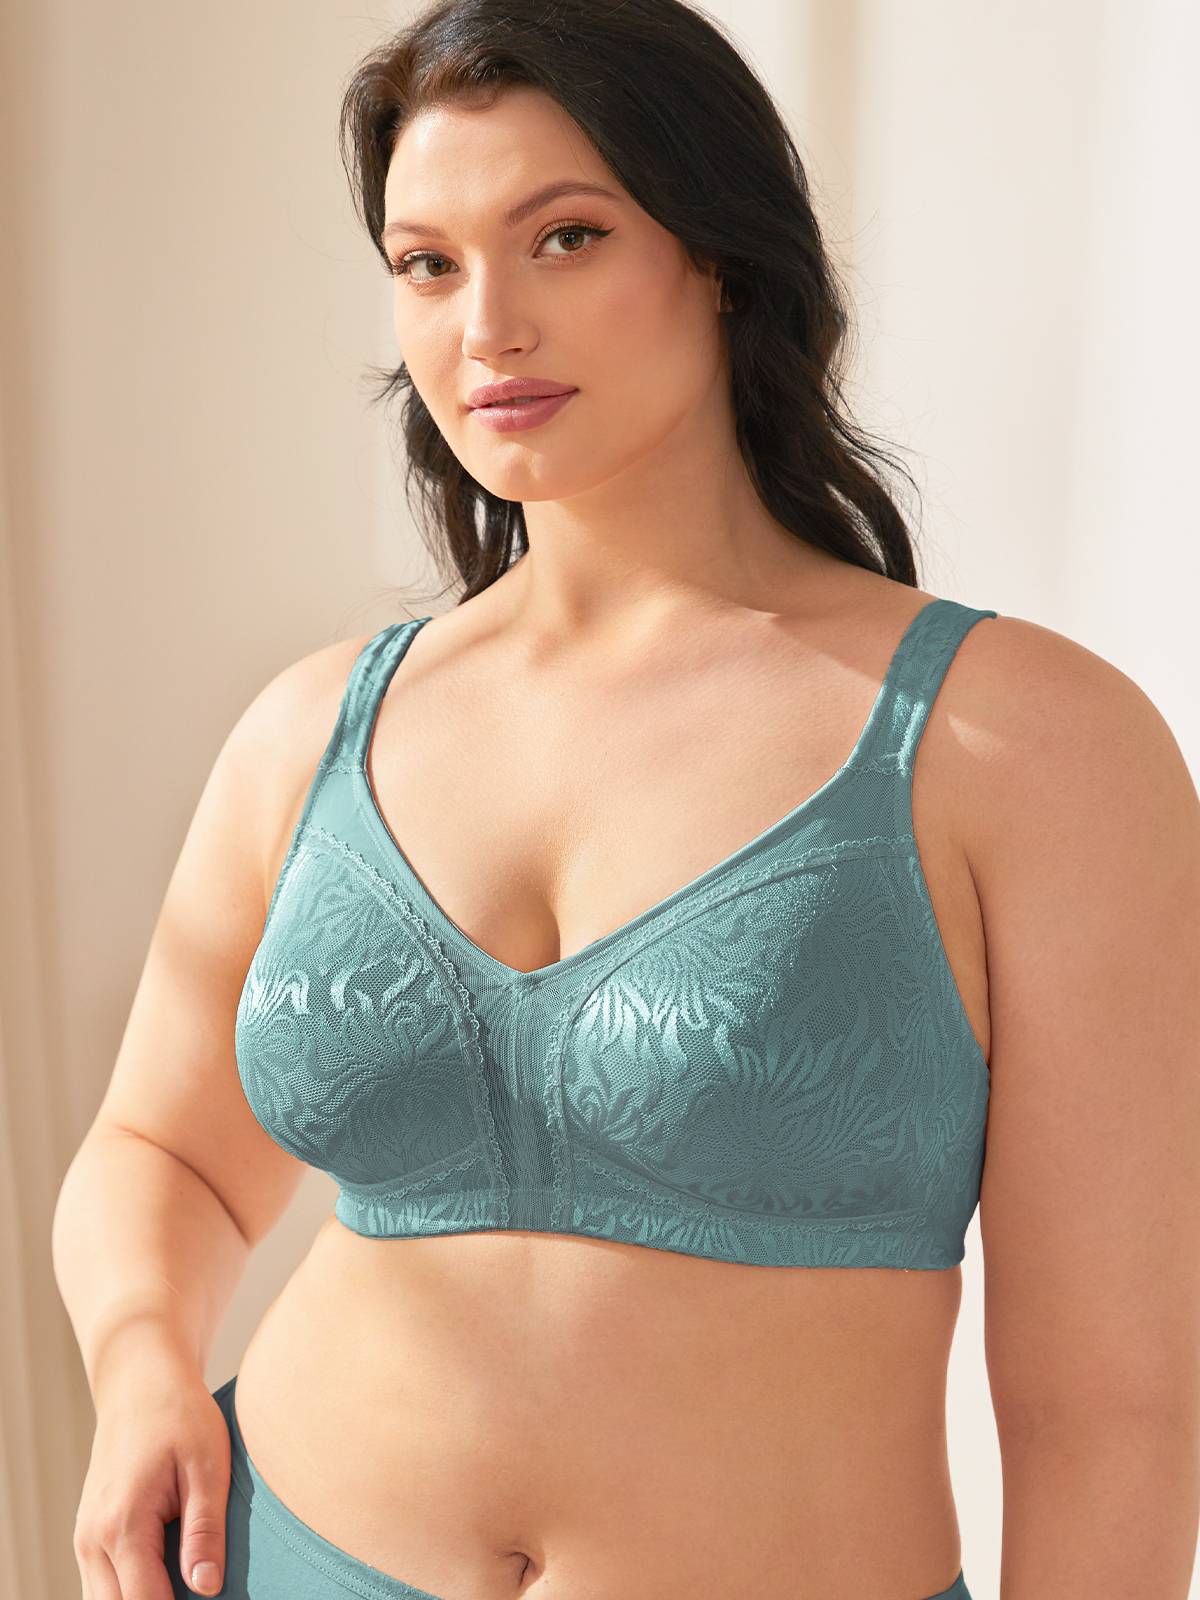 Women's Underwire Unlined Bra Minimizers Non-Padded Full Coverage Lace Plus  Size 42G